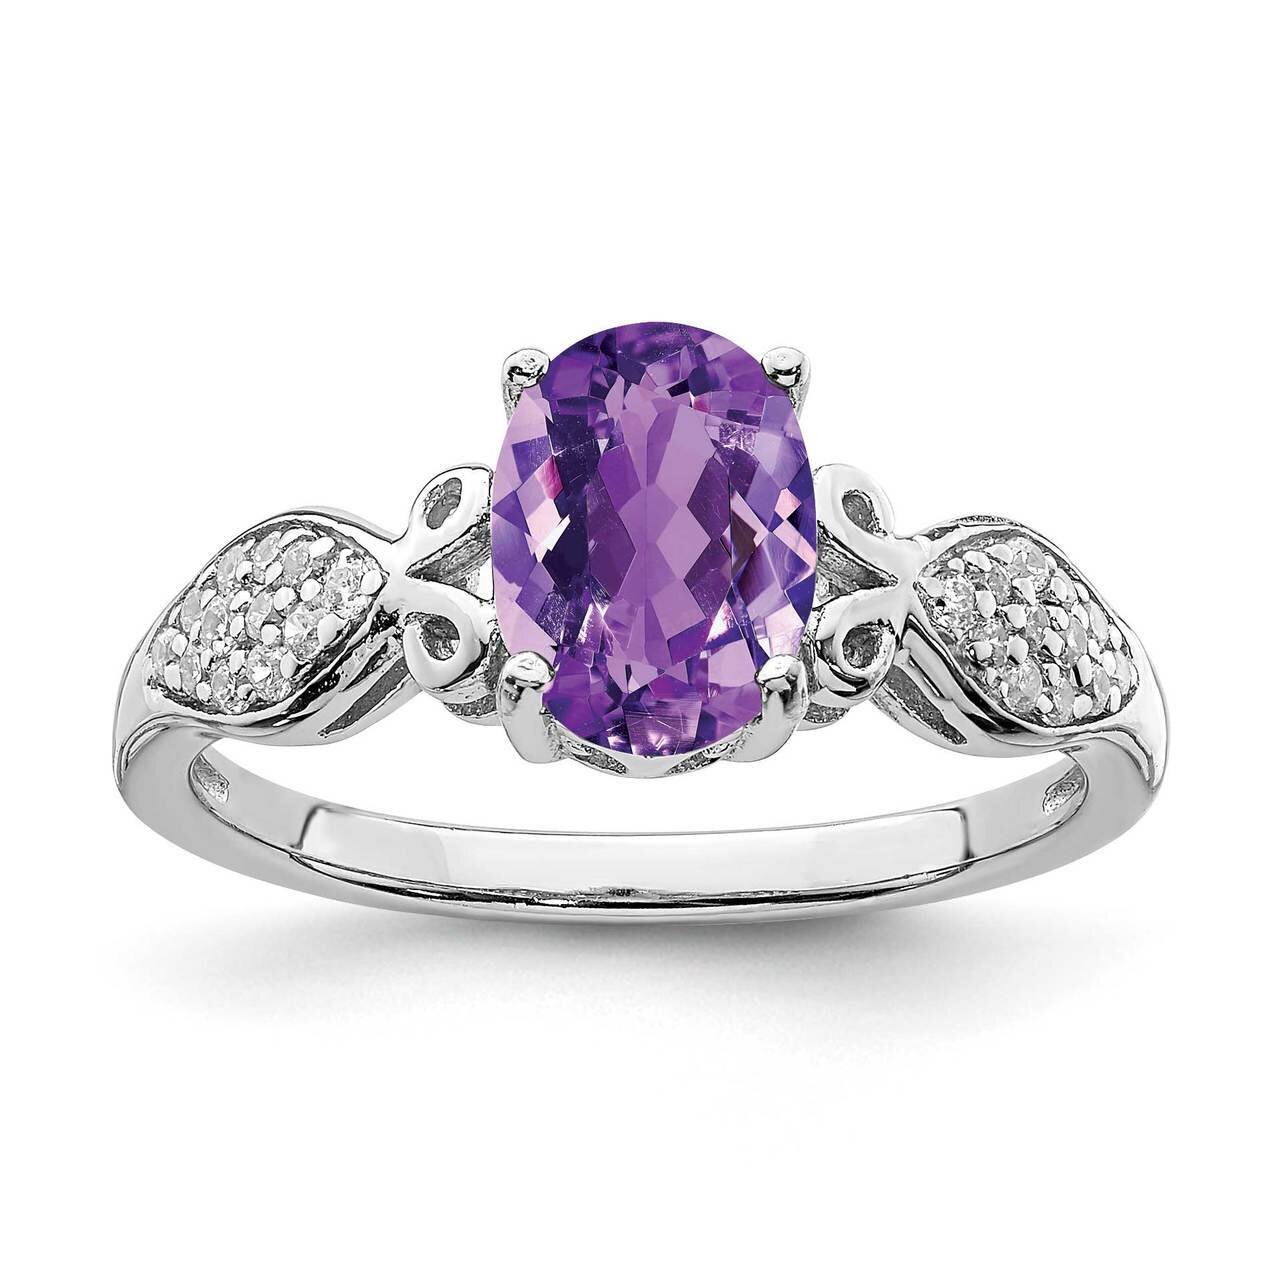 Polished Amethyst and White CZ Diamond Ring Sterling Silver Rhodium Plated QR7137